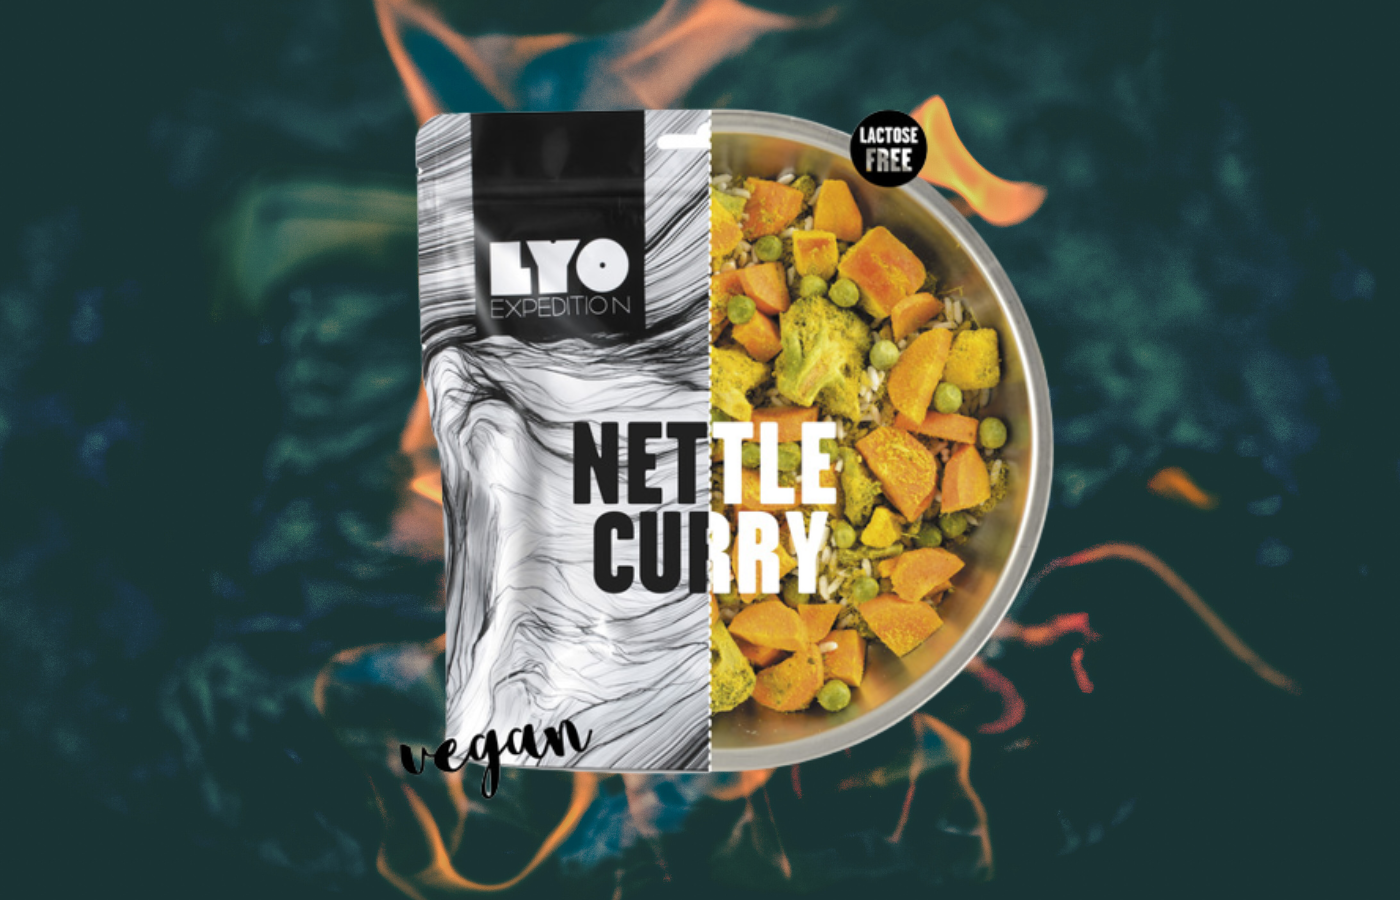 LYO Expedition Nettle Curry - best vegetarian backpacking meals